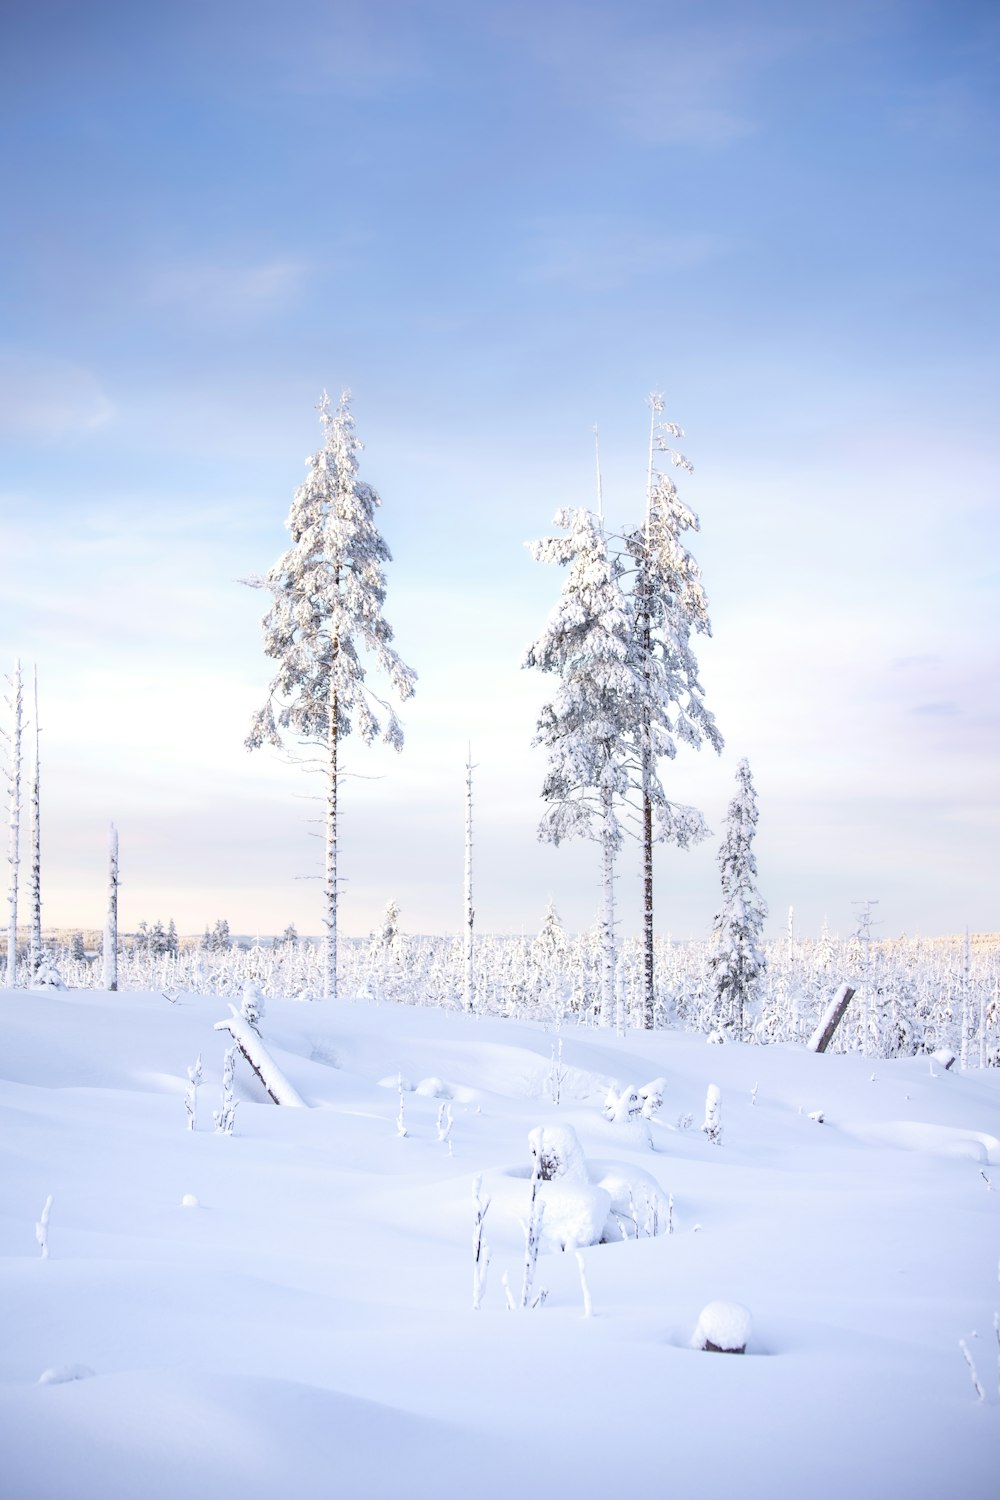 a snow covered field with trees in the background